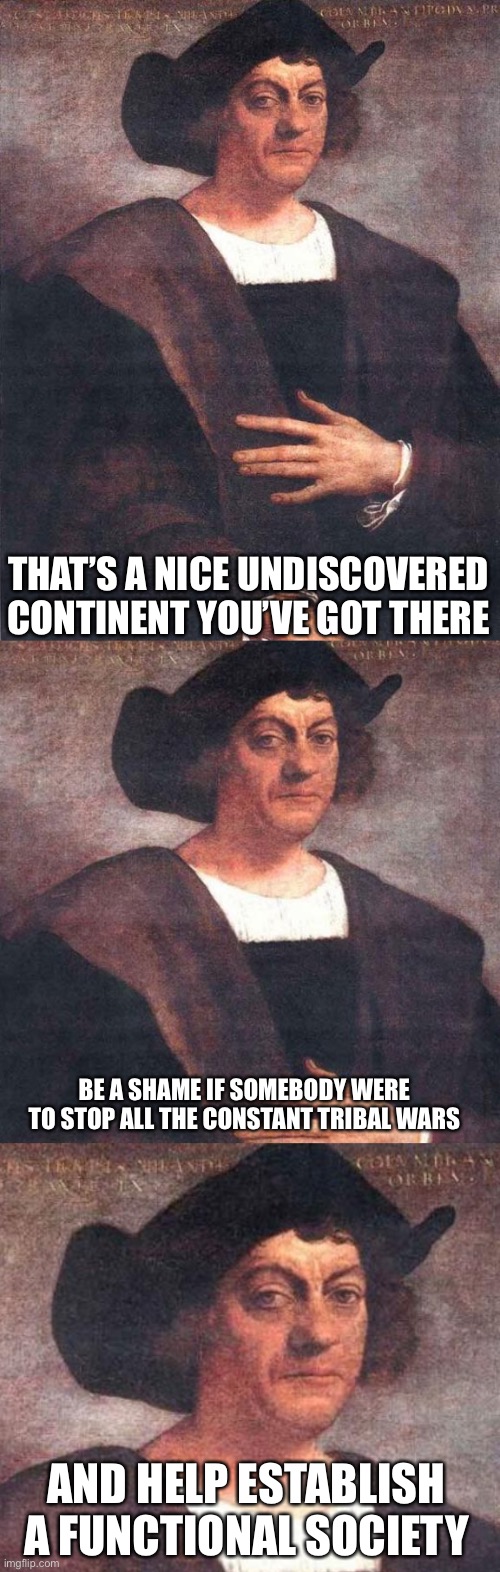 THAT’S A NICE UNDISCOVERED CONTINENT YOU’VE GOT THERE BE A SHAME IF SOMEBODY WERE TO STOP ALL THE CONSTANT TRIBAL WARS AND HELP ESTABLISH A  | image tagged in christopher columbus | made w/ Imgflip meme maker